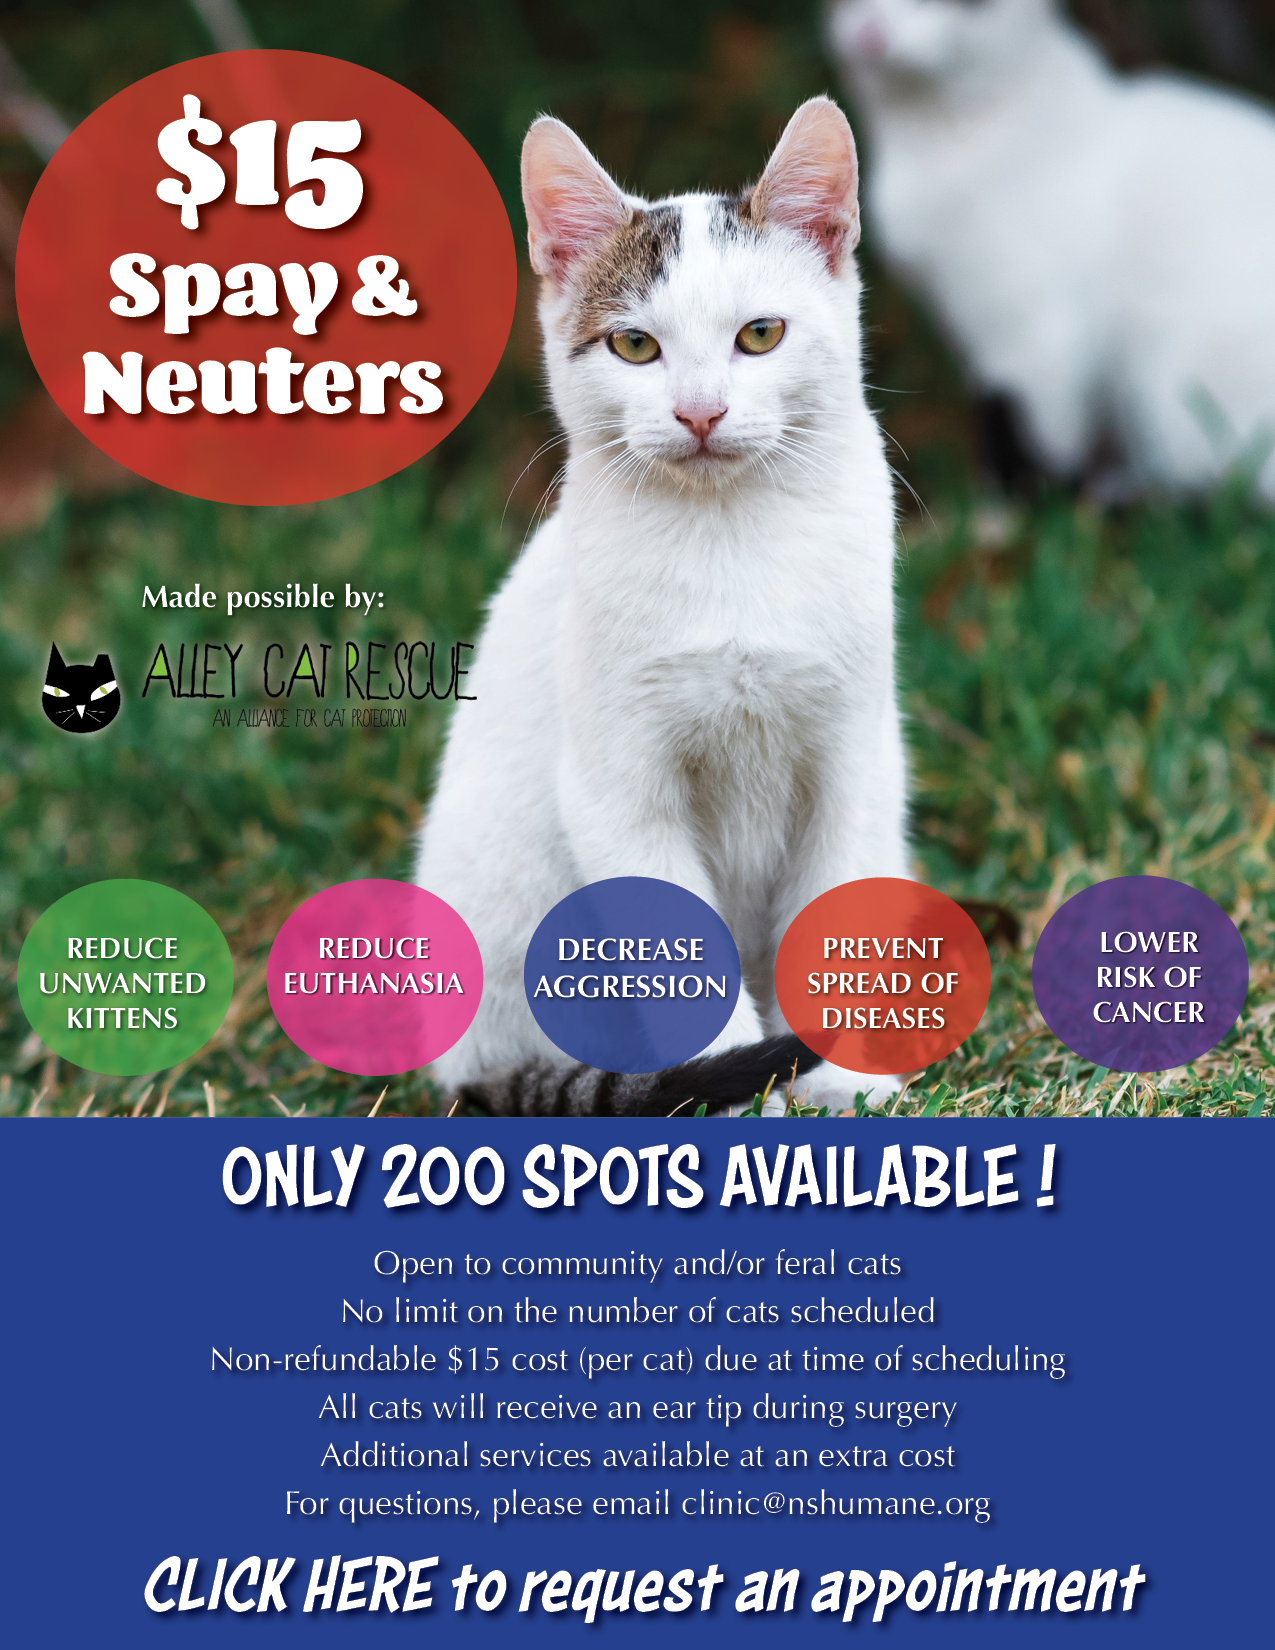 low_Cost_spay_neuter_cat